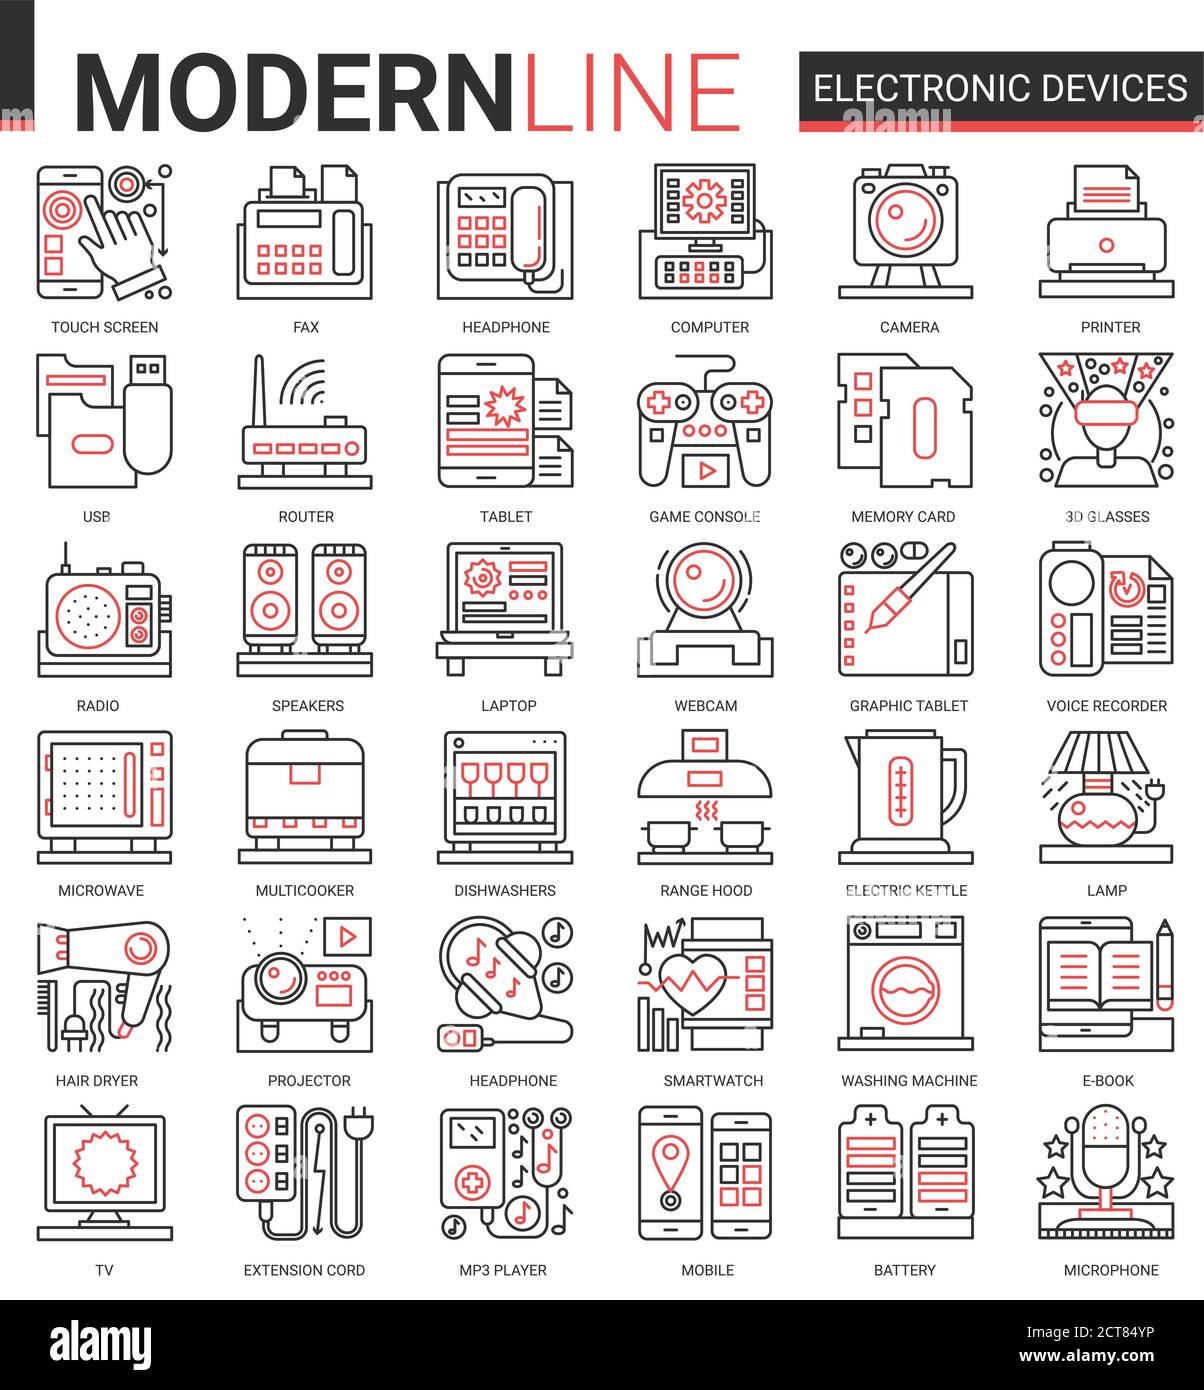 Electronic devices complex concept icon vector set. Red black thin line computer game accessories and kitchen appliances collection of outline electronically symbols for gadget or kitchenware store Stock Vector